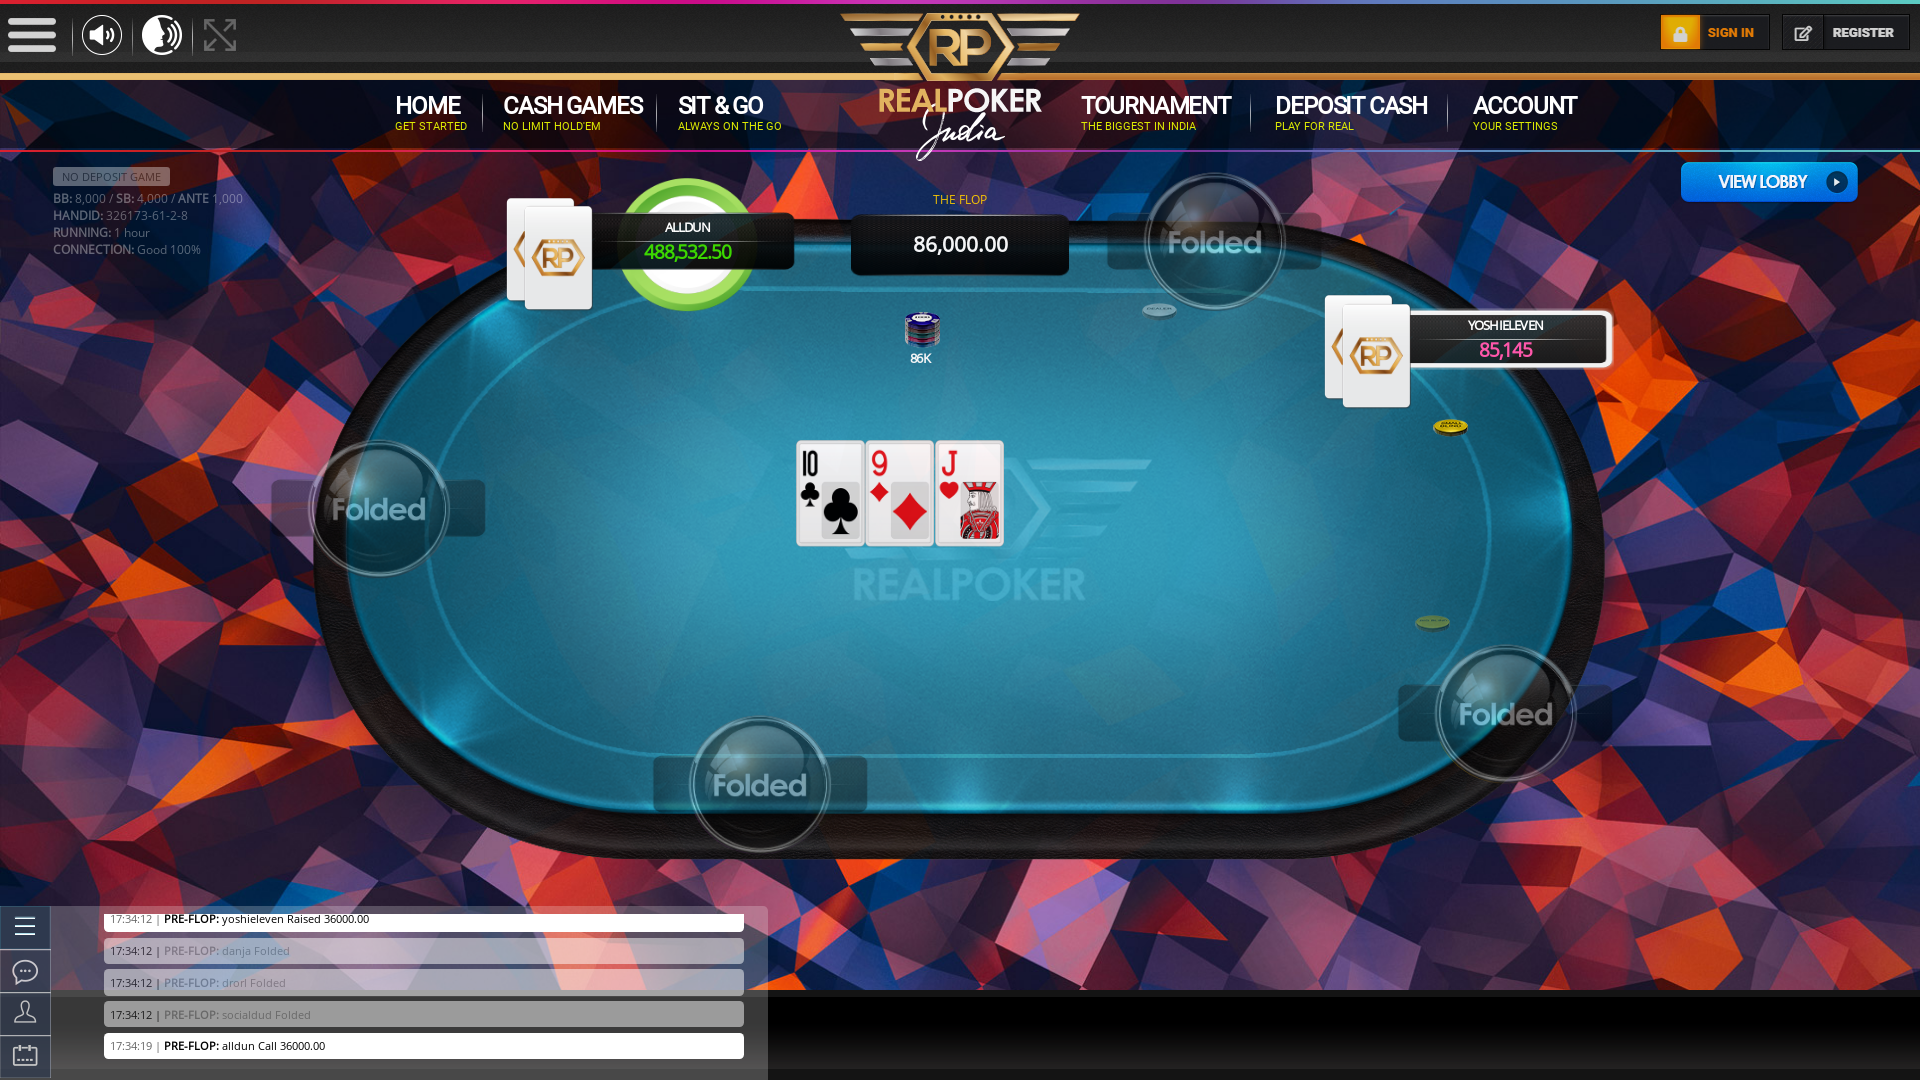 Mormugao Goa online poker game on a 10 player table in the 84th minute of the meeting